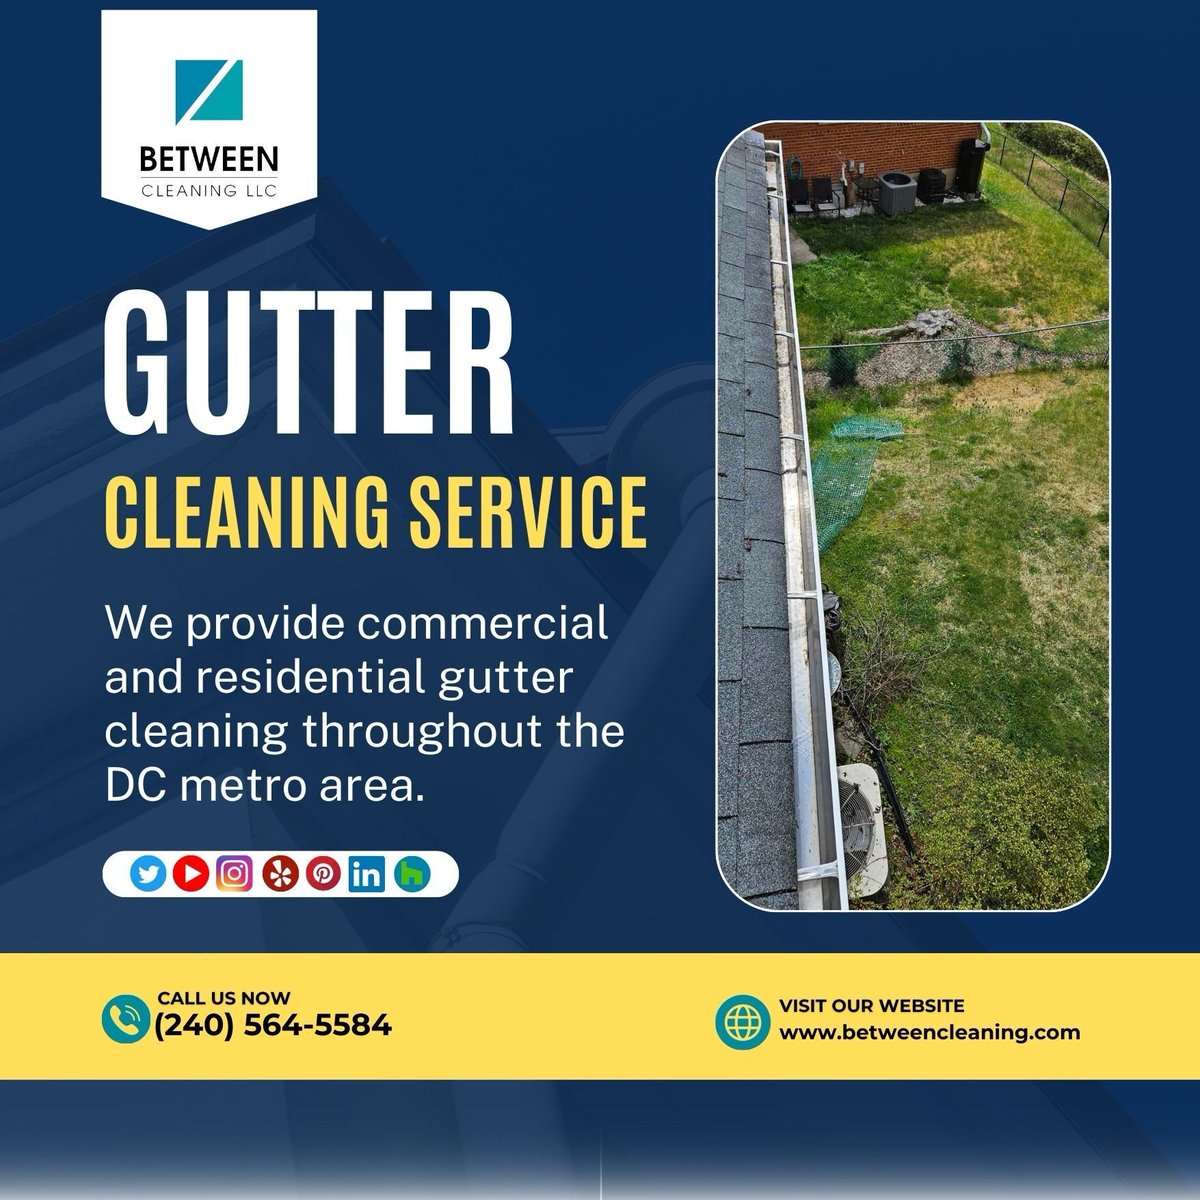 Keep your gutters clear and your property protected with our expert gutter cleaning services in Northern Virginia! 🍂 Say goodbye to clogs and water damage, and hello to peace of mind. #GutterCleaning #NorthernVirginia #PropertyMaintenance #ProtectYourInvestment #CleanGutters